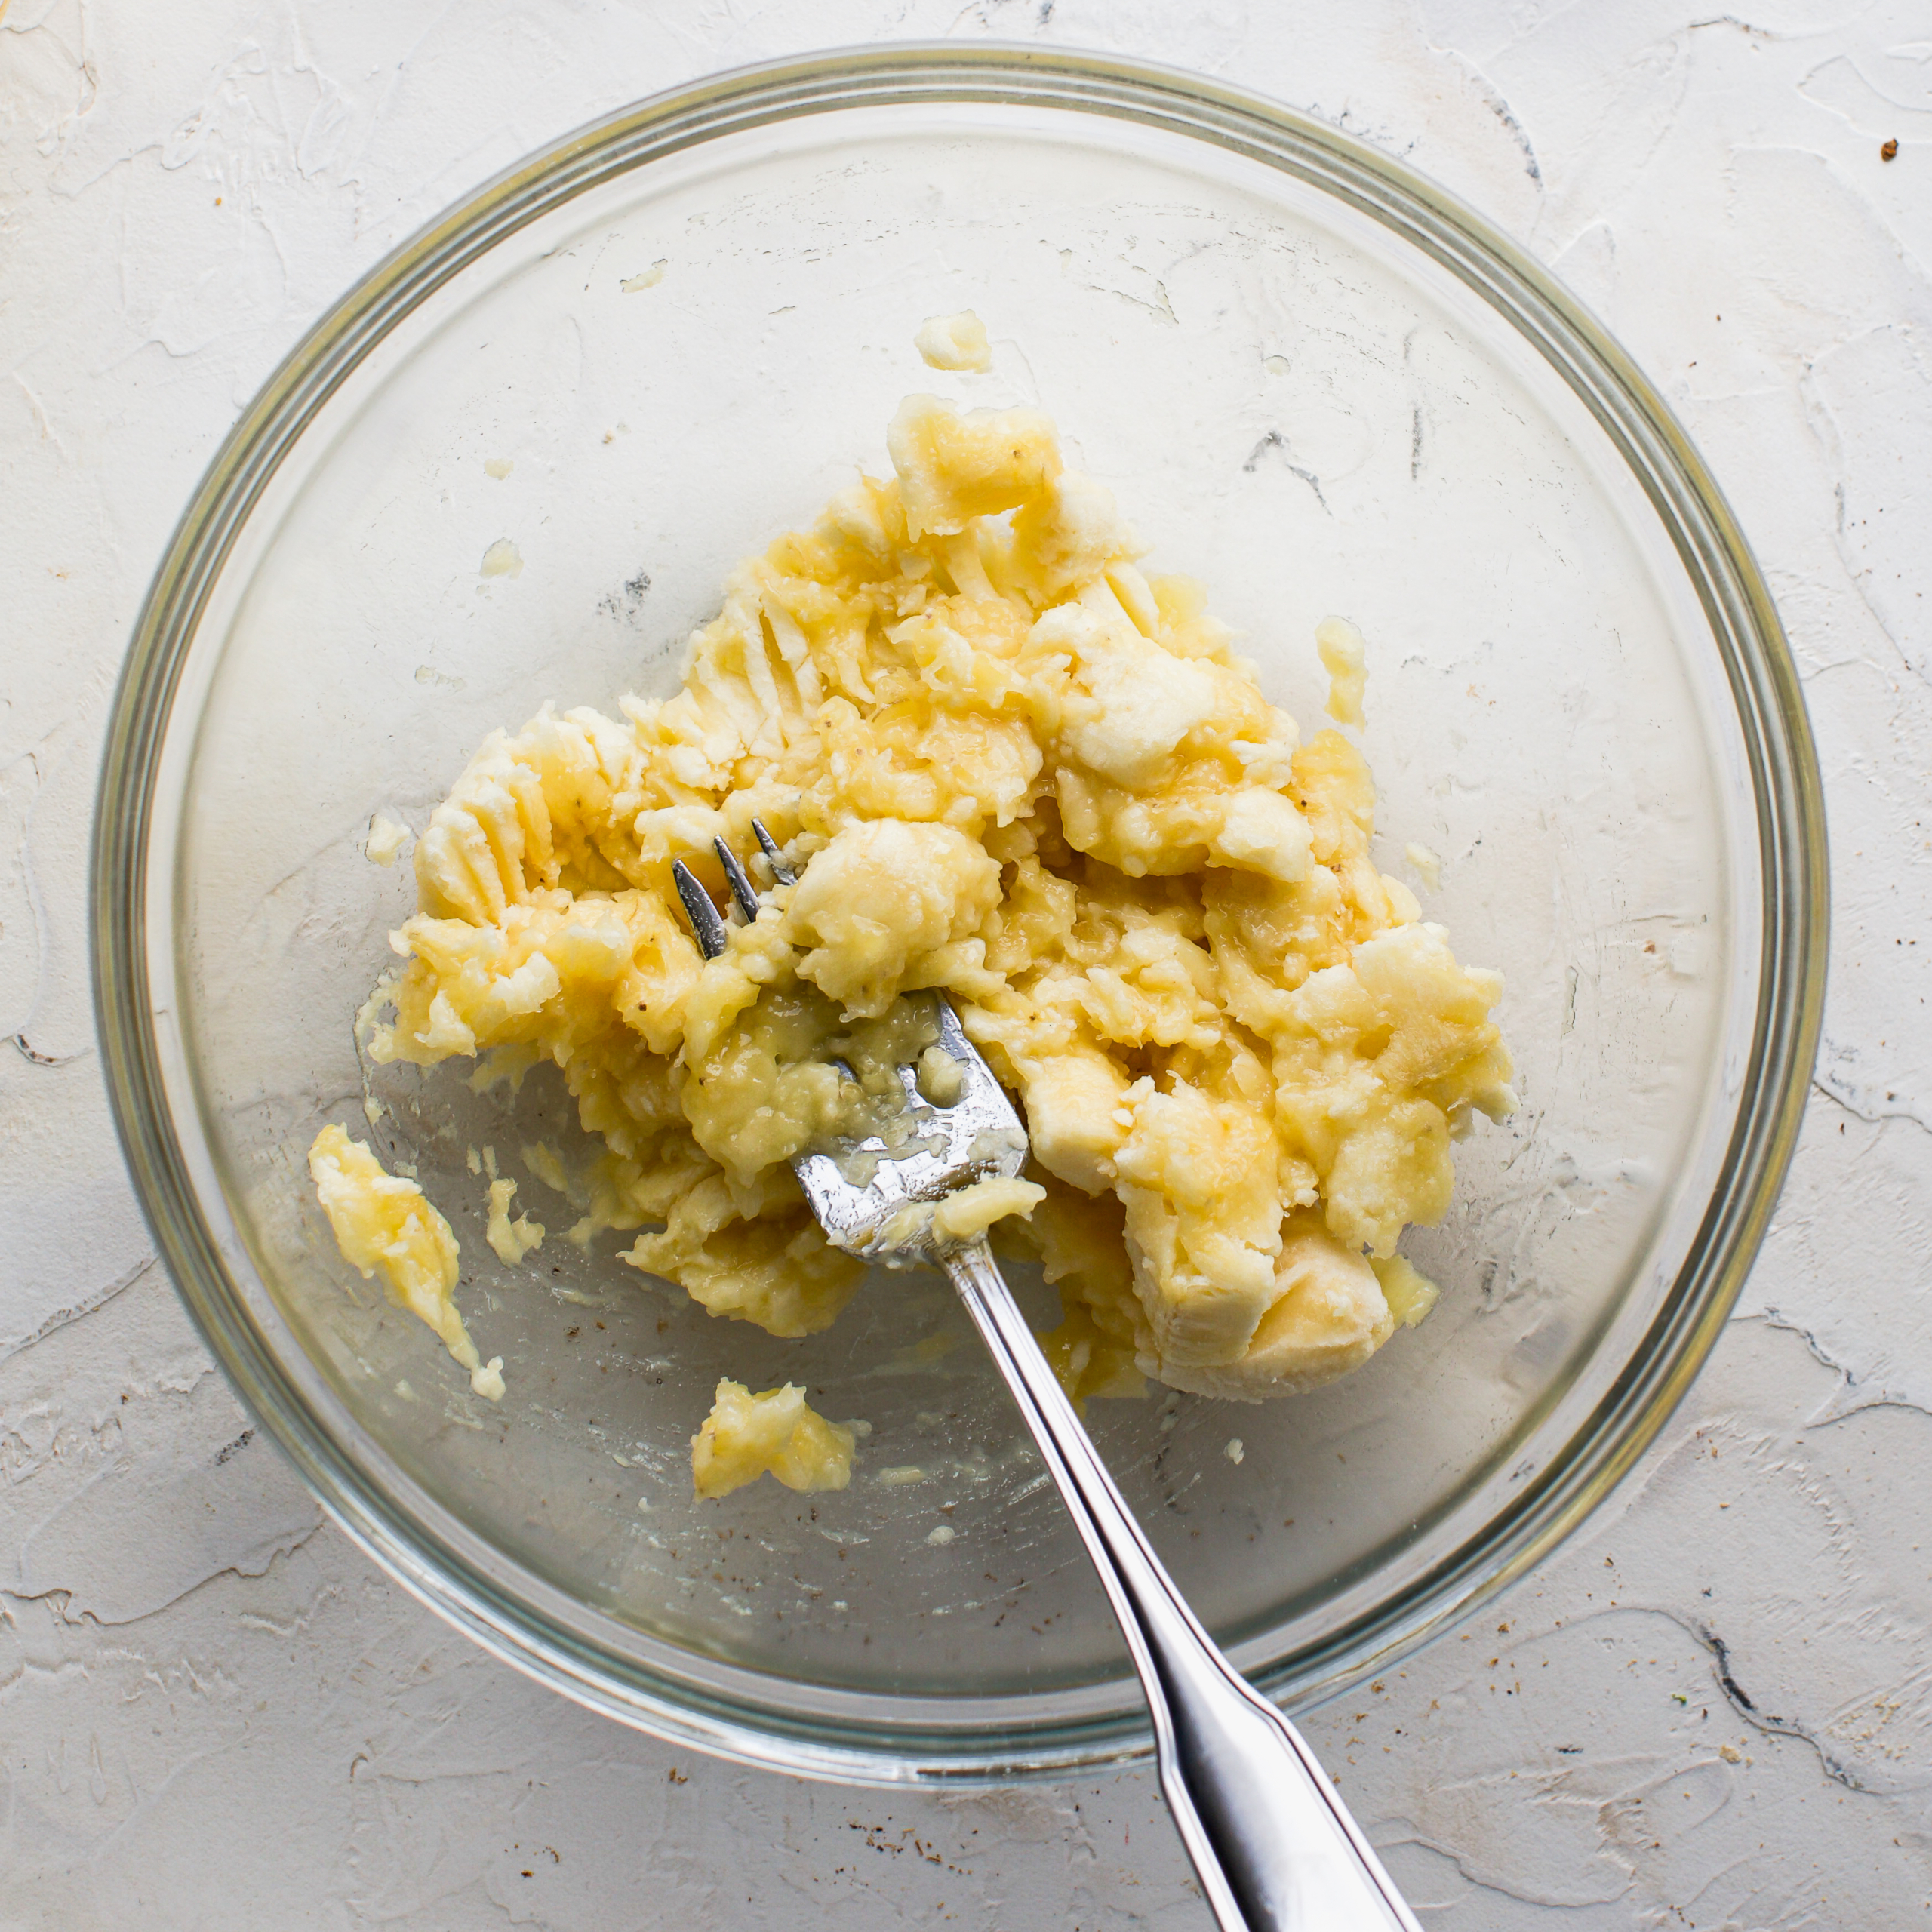 A glass bowl with mashed bananas.